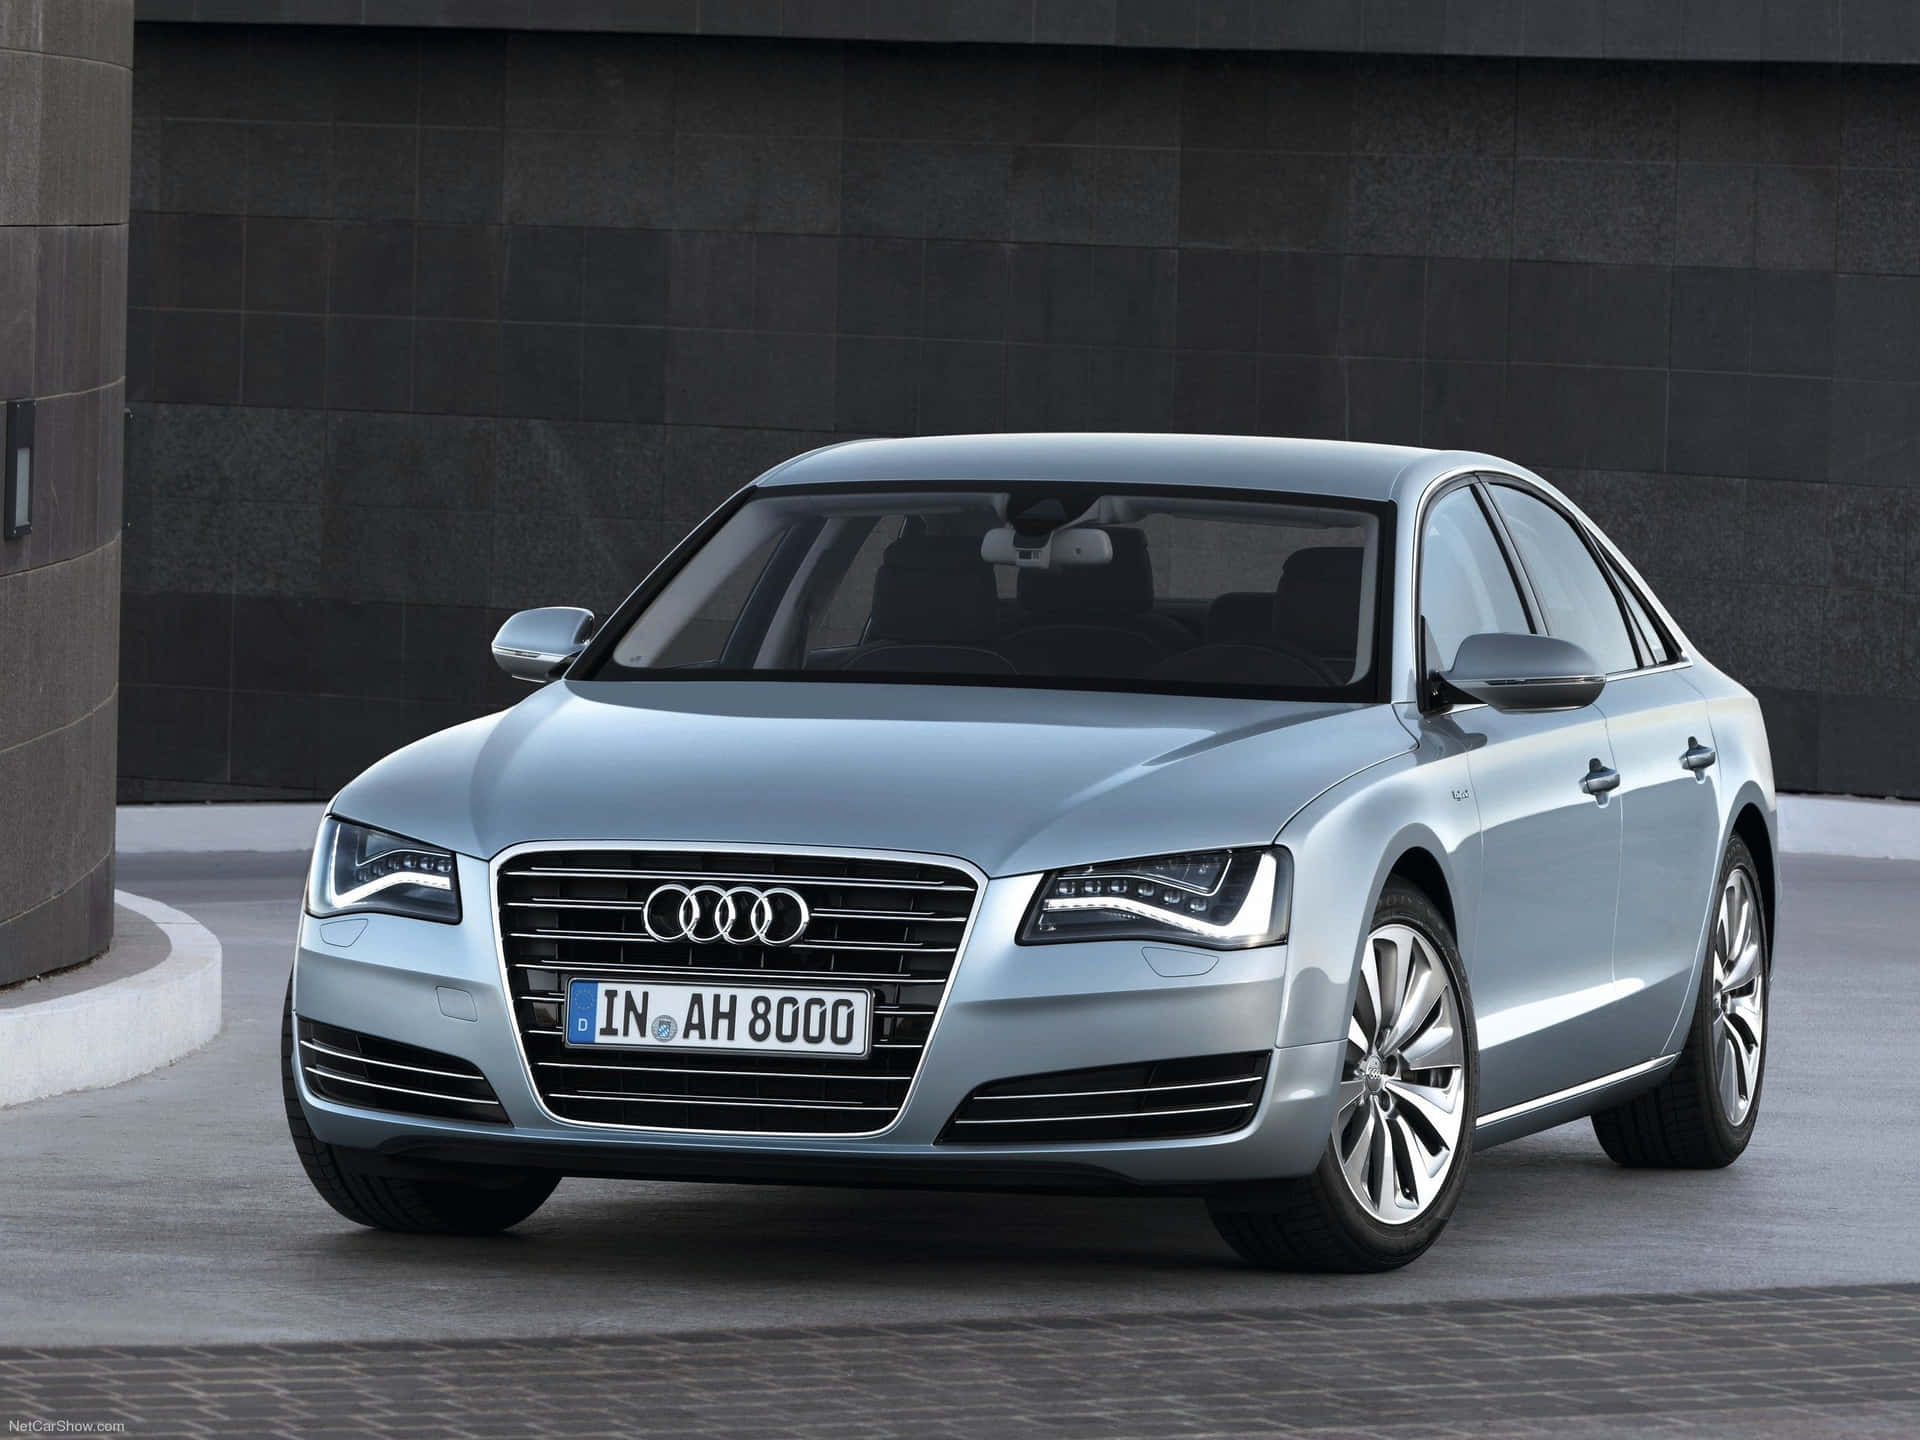 Sleek and sophisicated Audi S8 accelerating on an open road. Wallpaper